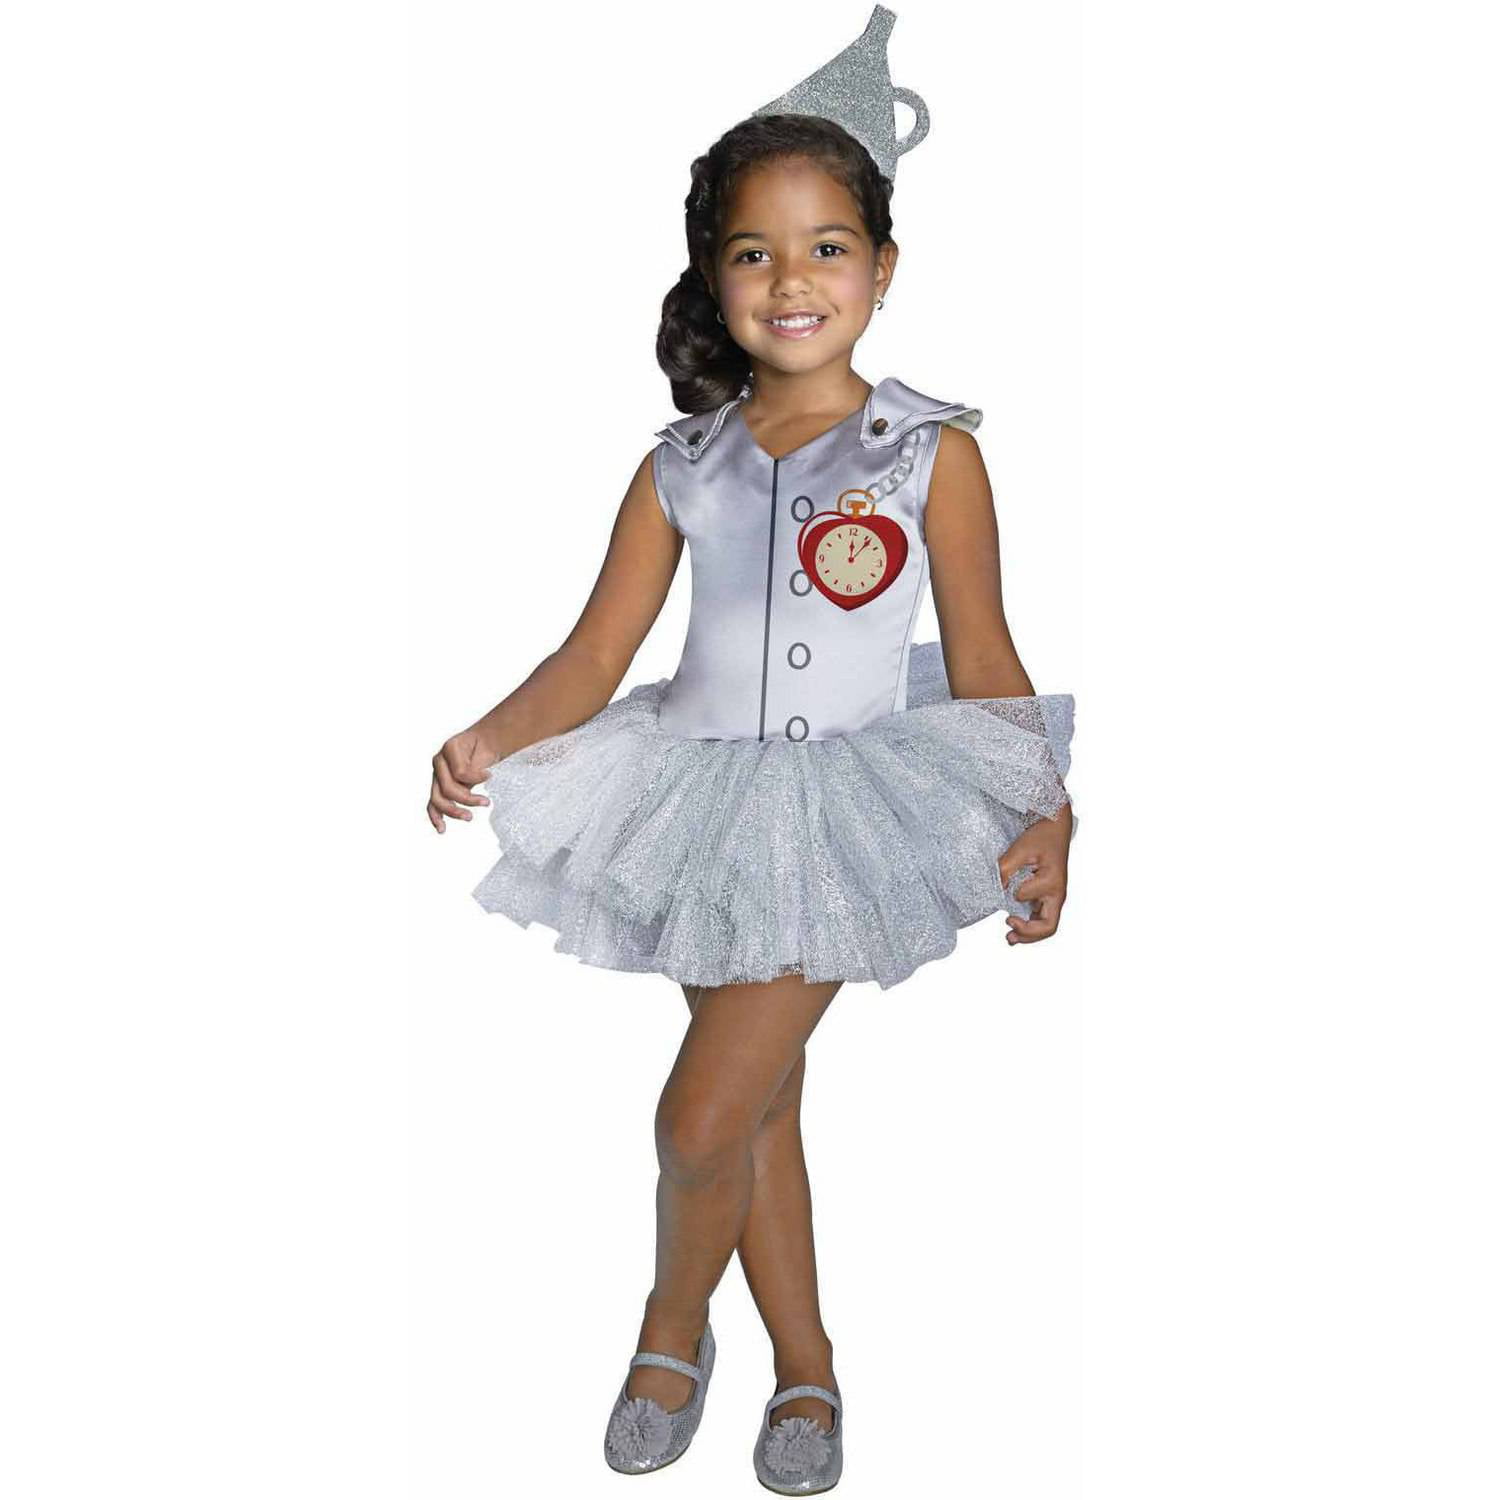 Halloween Tin Man The Wizard of Oz Kids Costume Party Luxury Dress Up for Girls